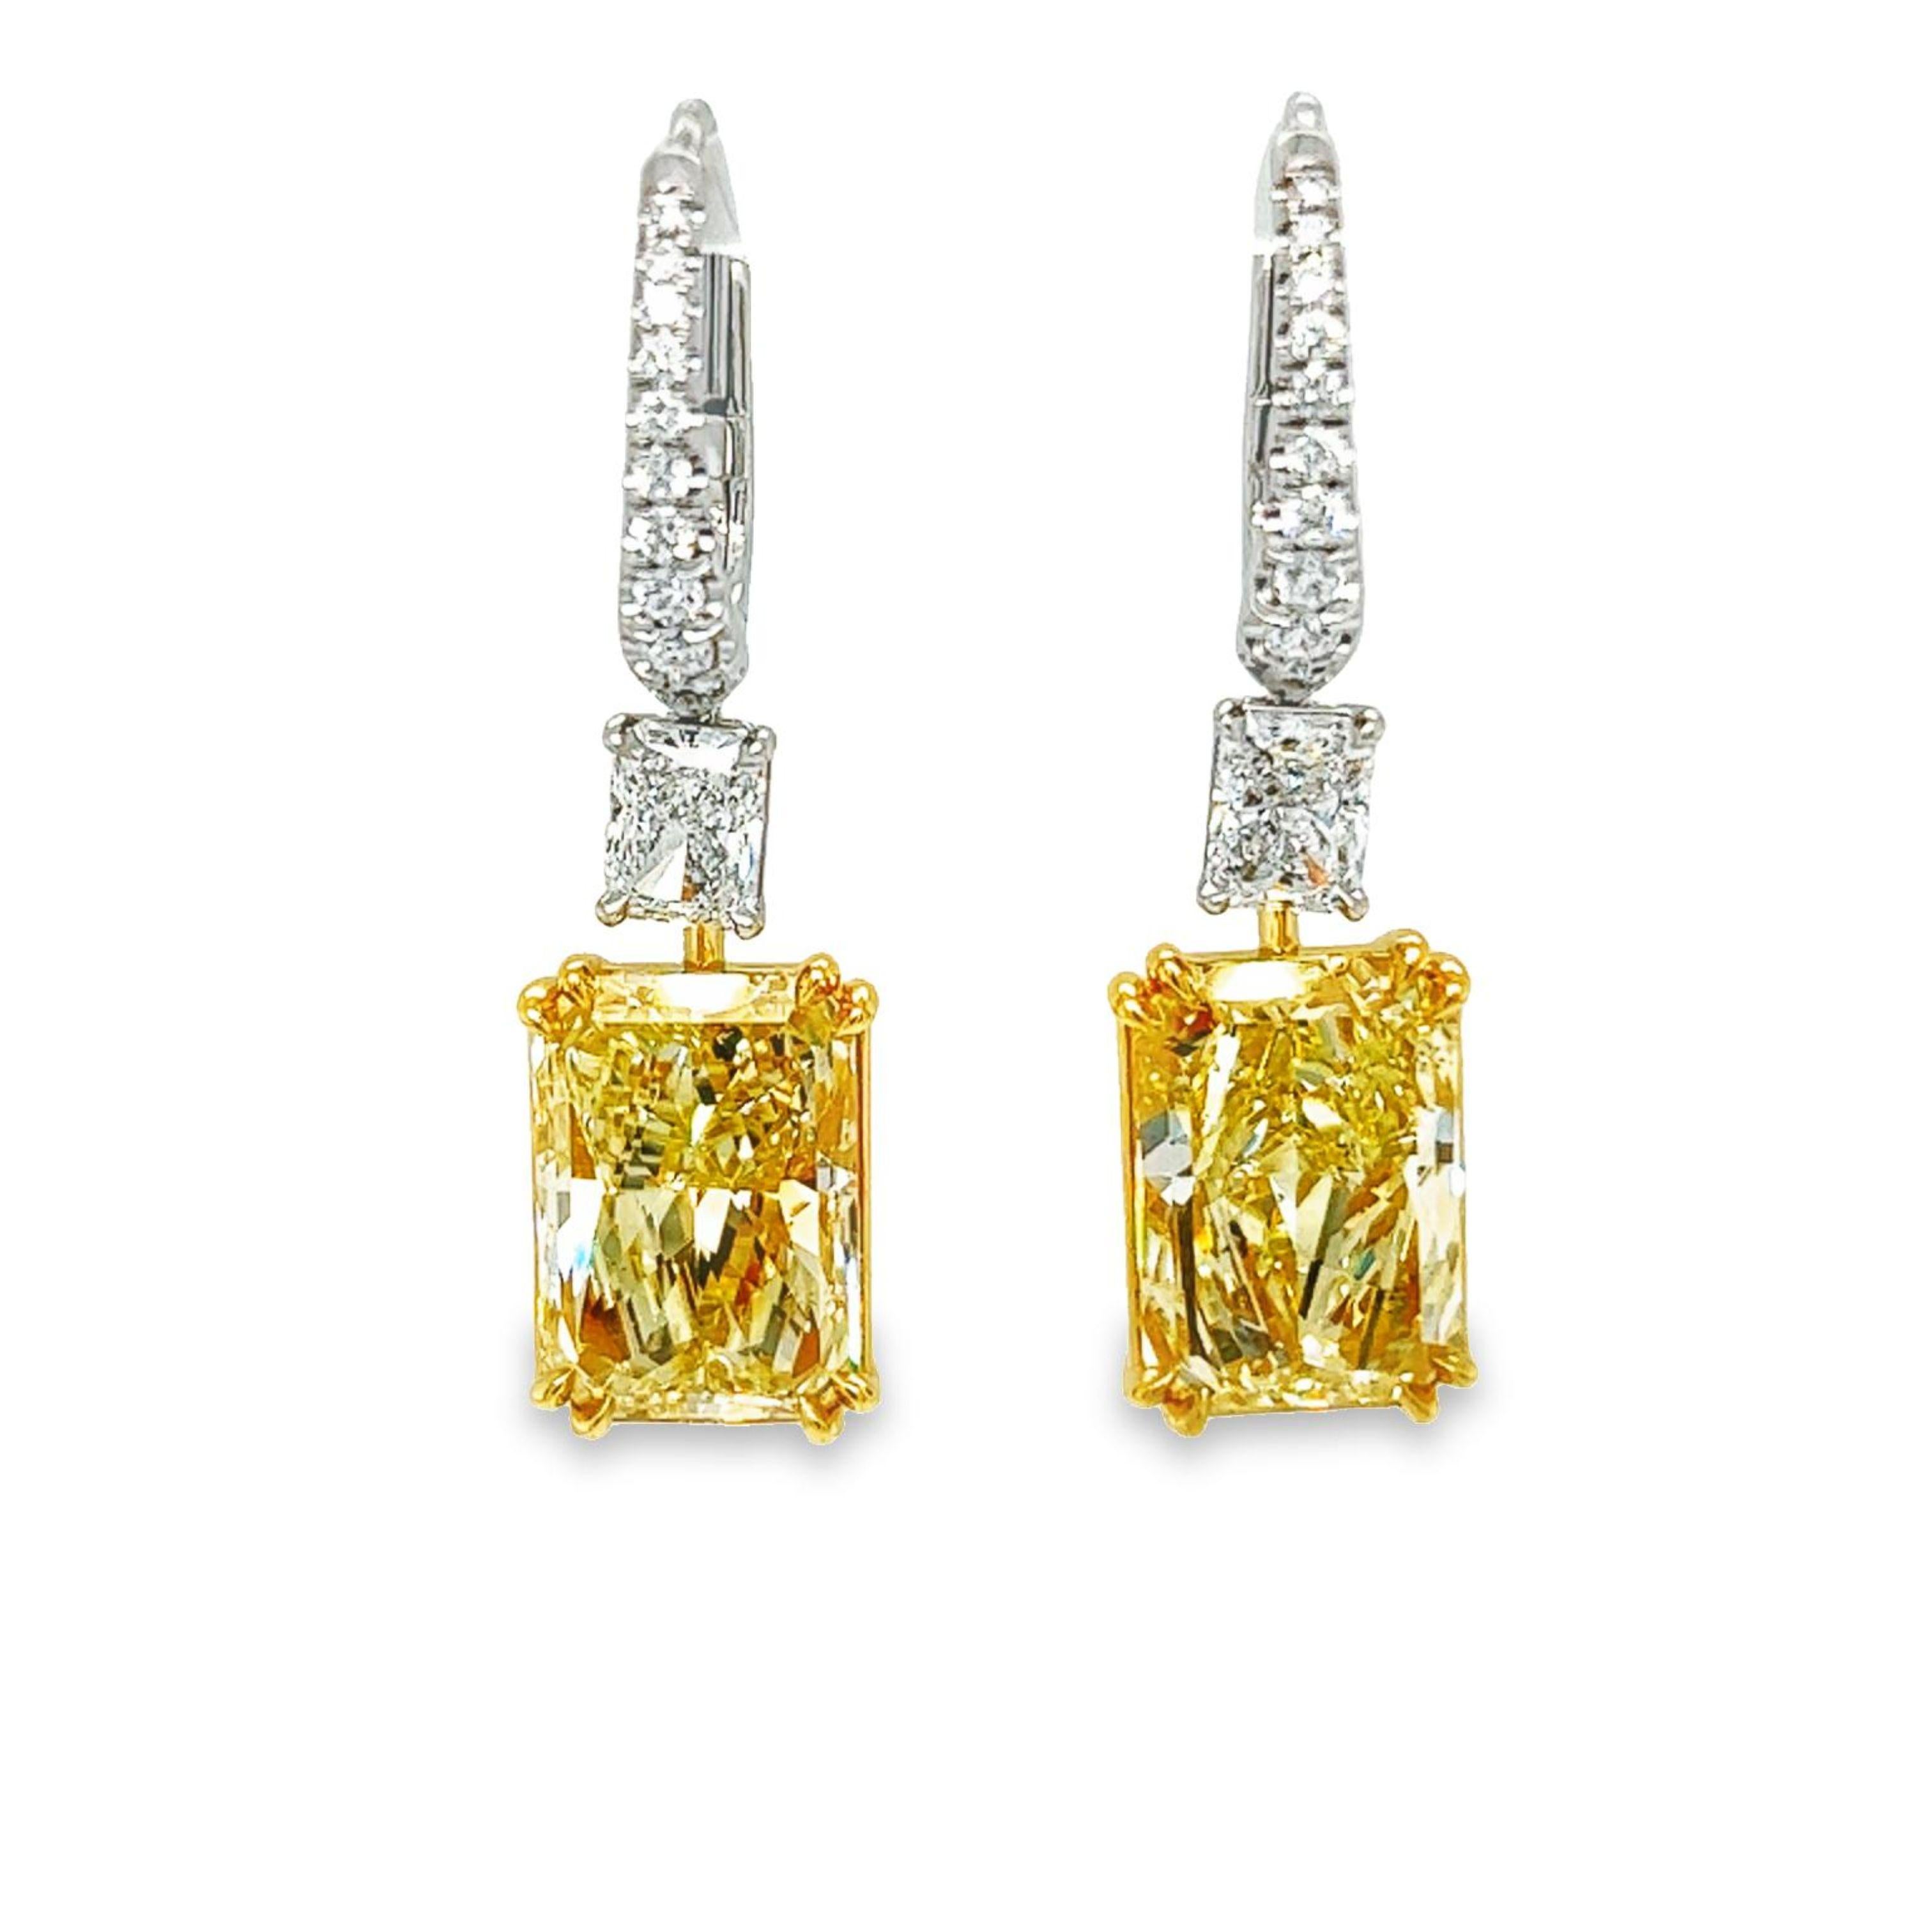 A beautifully matched 14.05 total weight Radiant Light Yellow SI1 - SI2 clarity diamond earrings are GIA Certified. These gorgeous light weight dangling earrings set in platinum & 18k yellow gold also features a matched pair of 1.41 carat total